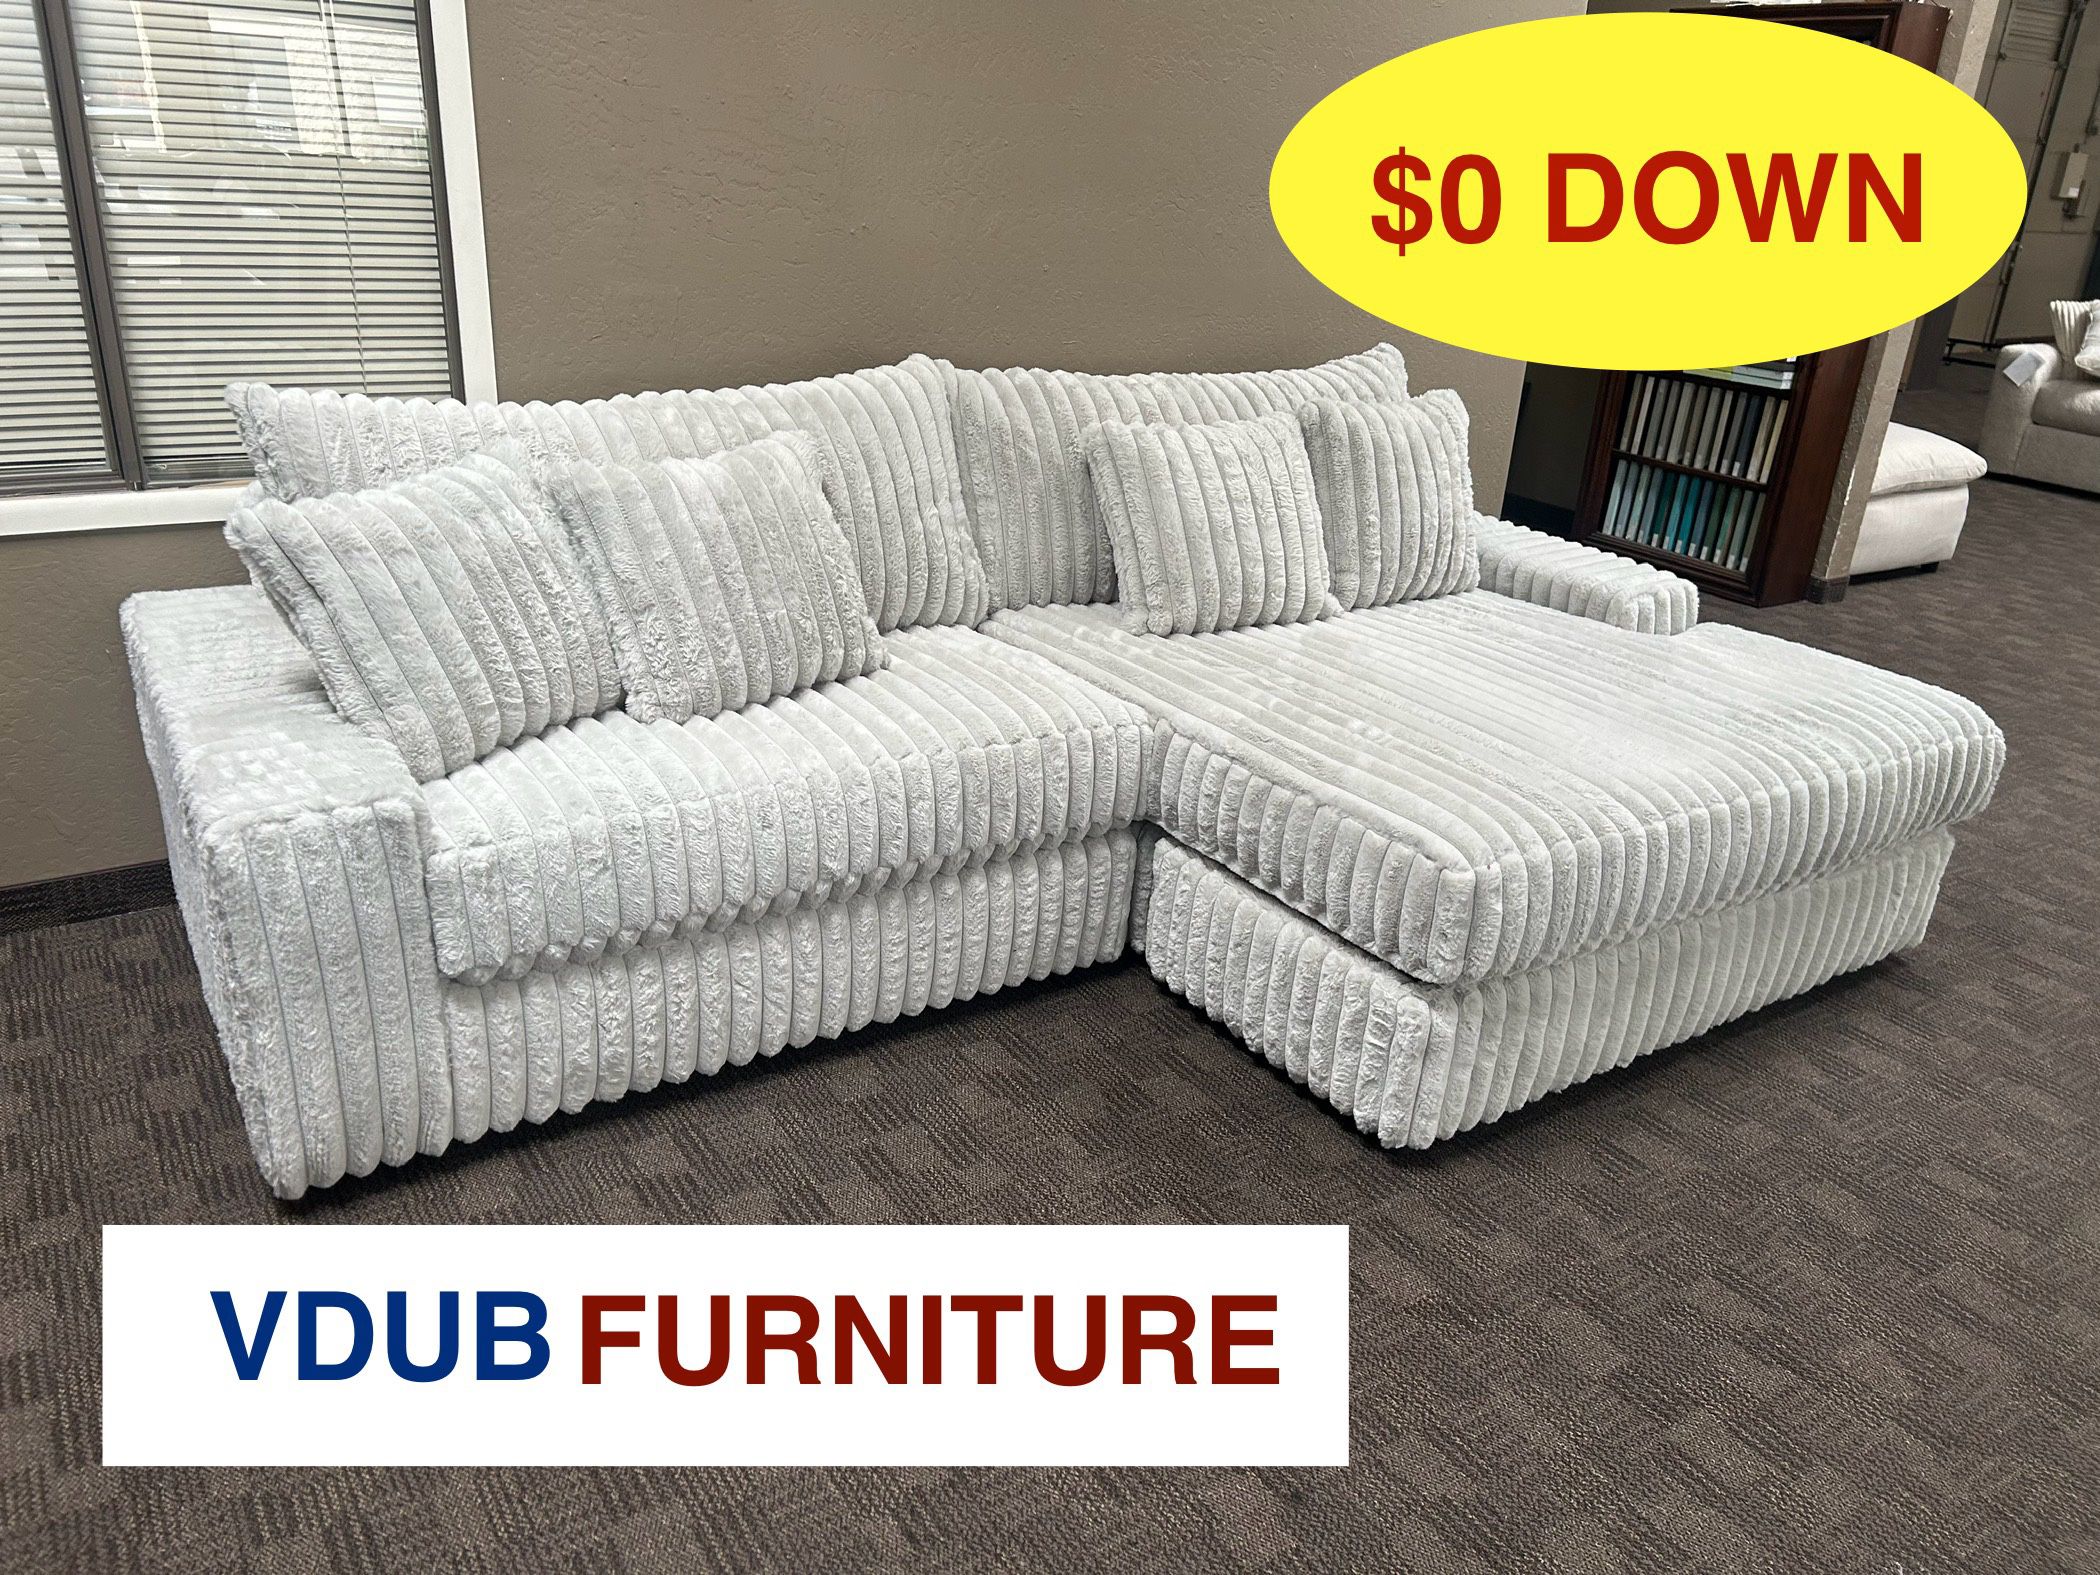 New White Beige Sectional Couch 